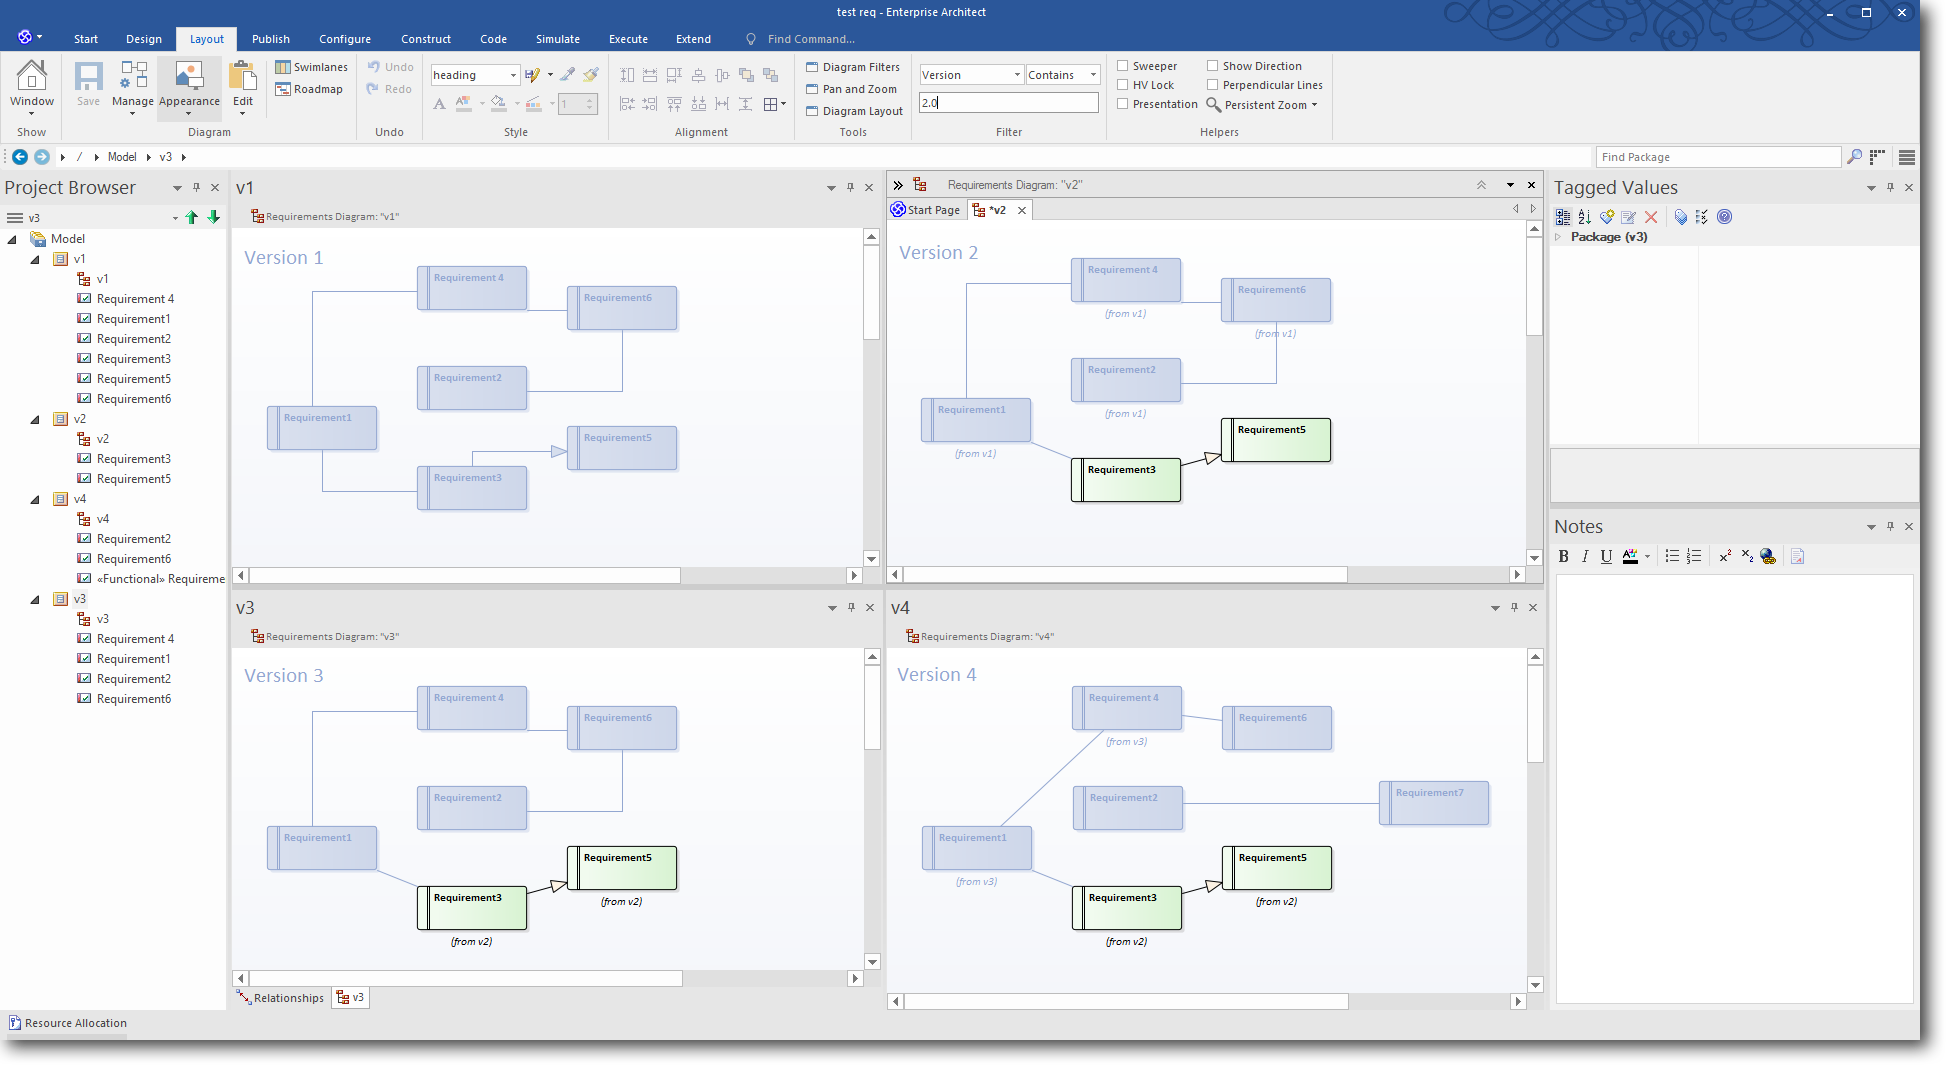 Enterprise Architect 13: Time Aware Modeling - Using a Diagram Filter to highlight Version 2.0 elements